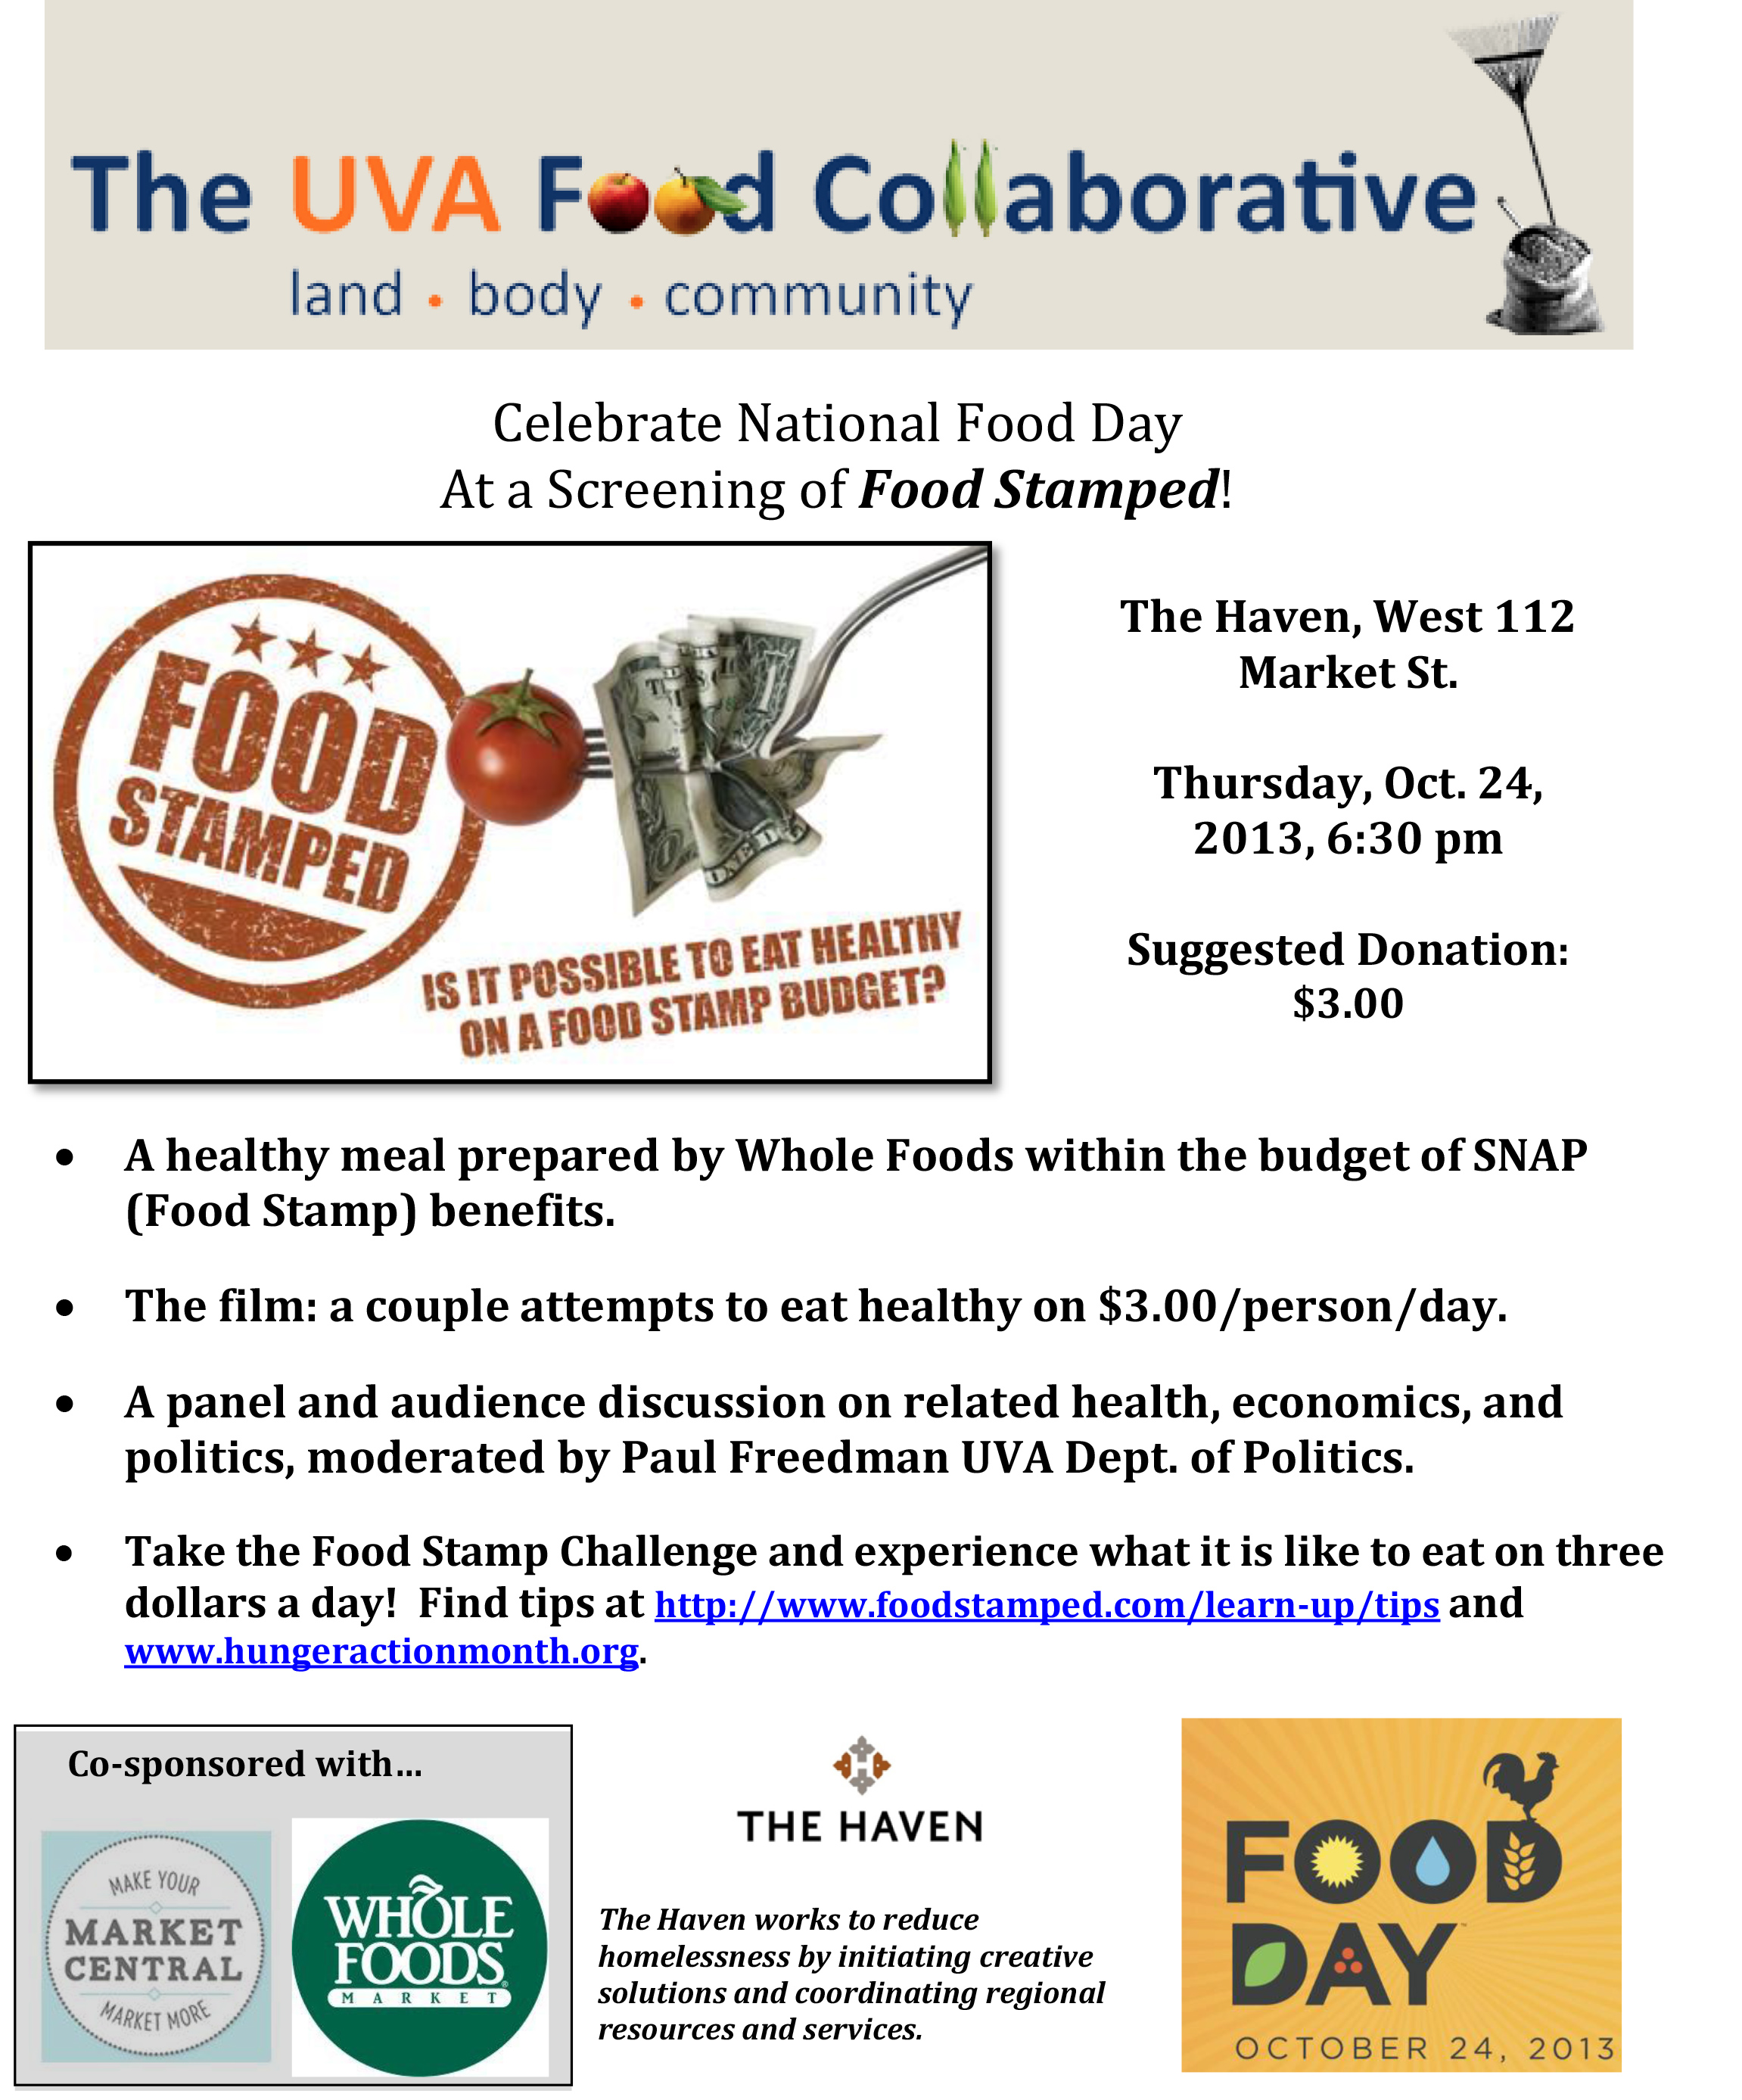 Text reads: The Food Collaborative: land, body, community.  Celebrate National Food day at a screening of food stamped! The Haven, West 112 Market st. Thursday Oct. 24, 2013, 6:30pm, suggested donation $3.00.  A healthy meal prepared by Whole Foods within the budget of SNAP (Food stamps) benefits.  The film: A couple attempts to eat healthy on $3.00/person/day.  A panel and audience discussion on related health, economics, and politics, moderated by Paul Feedman UVA Dept. of Politics.  Take the food stamp